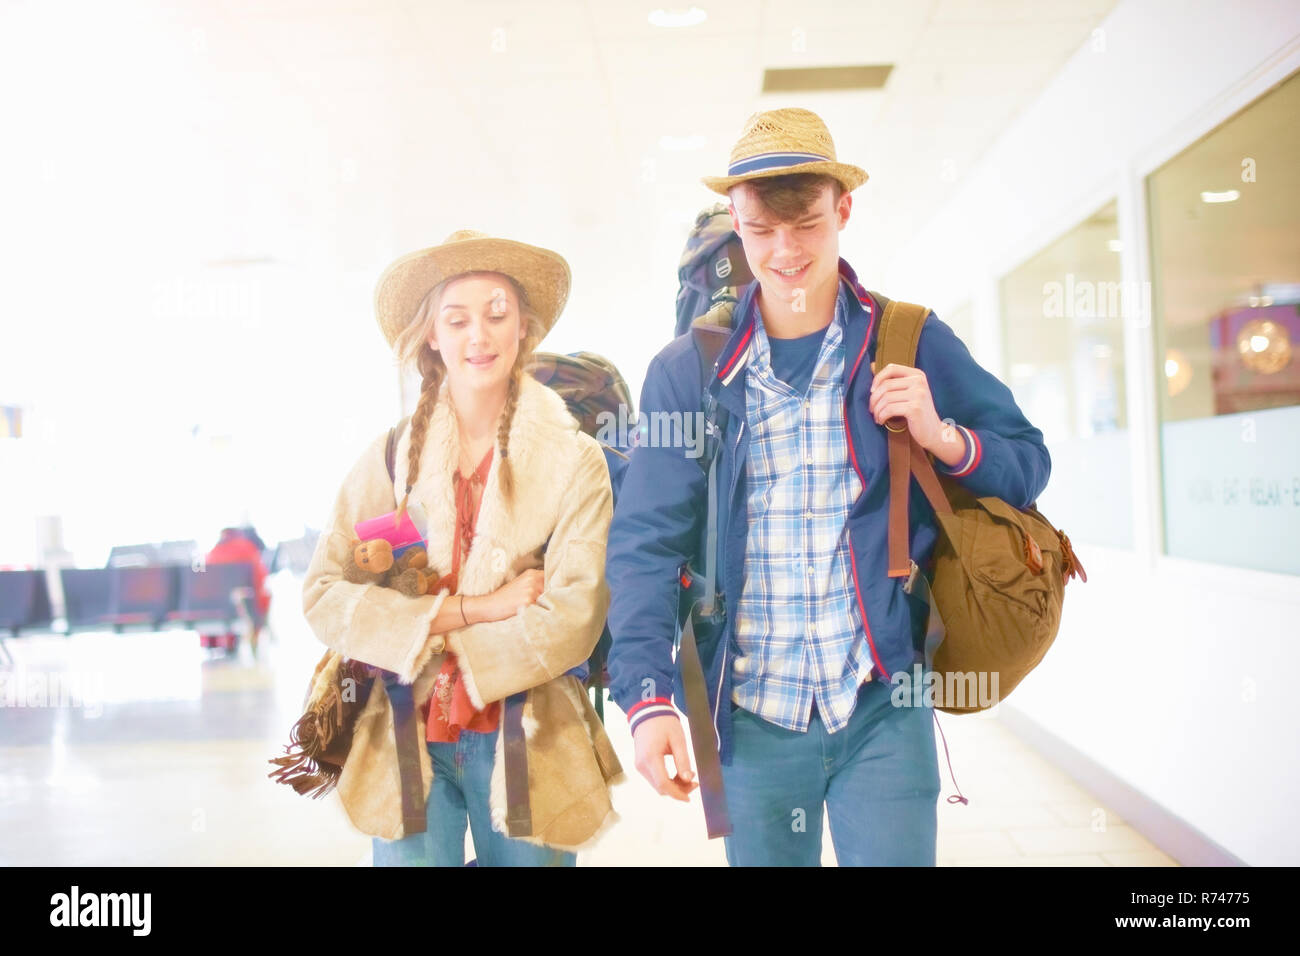 Young couple at airport, carrying backpacks, setting off on journey Stock Photo